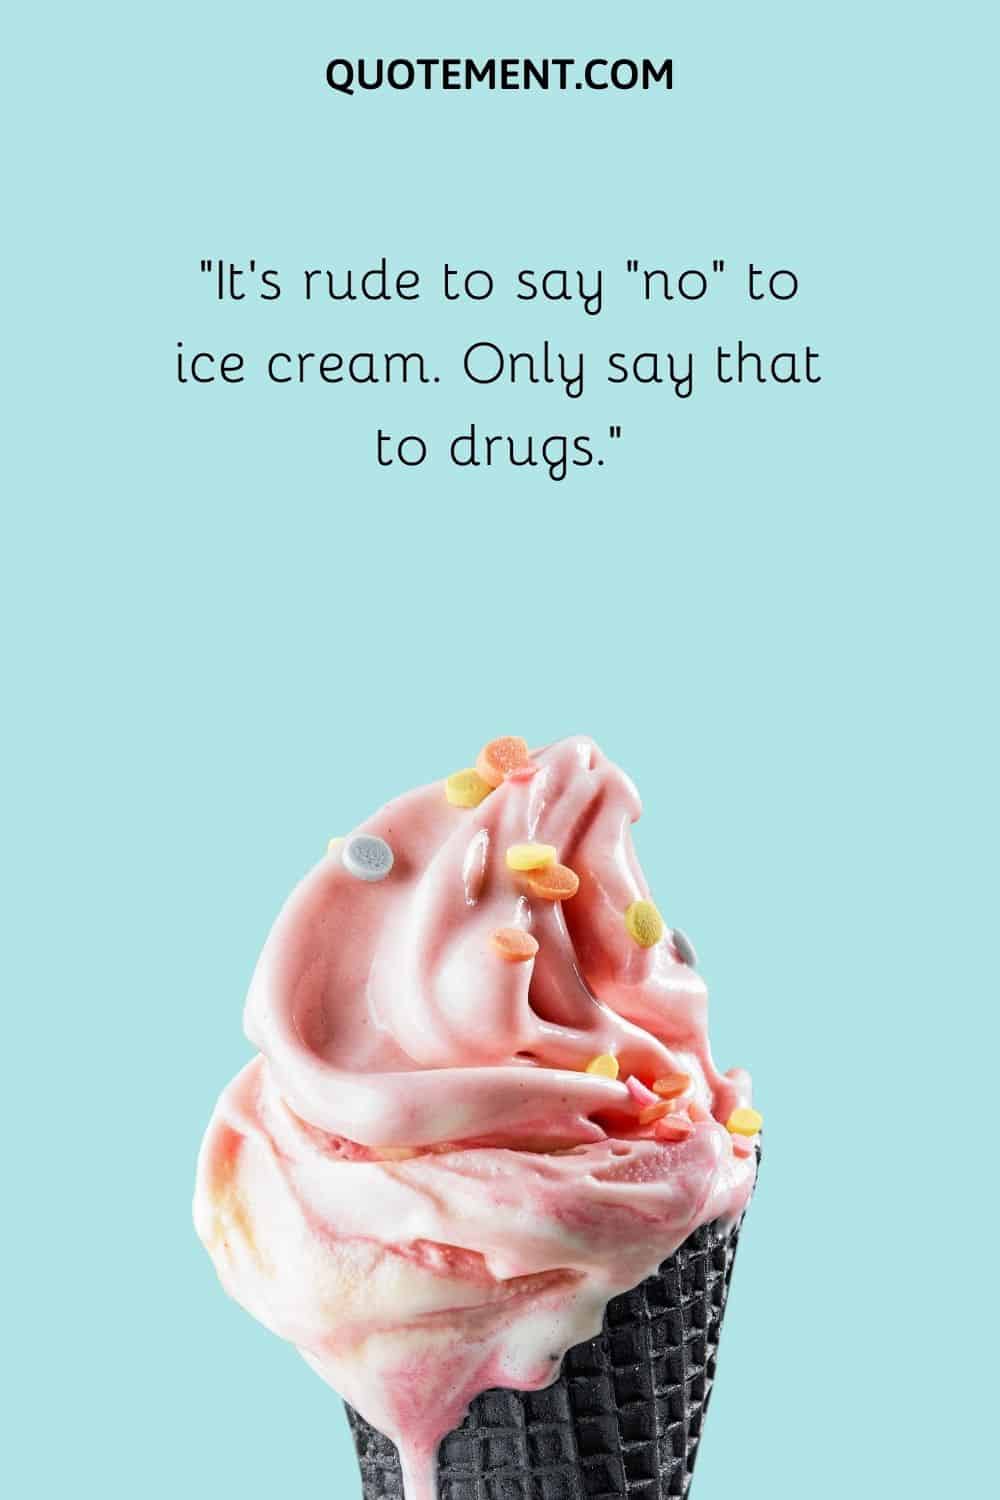 It’s rude to say “no” to ice cream